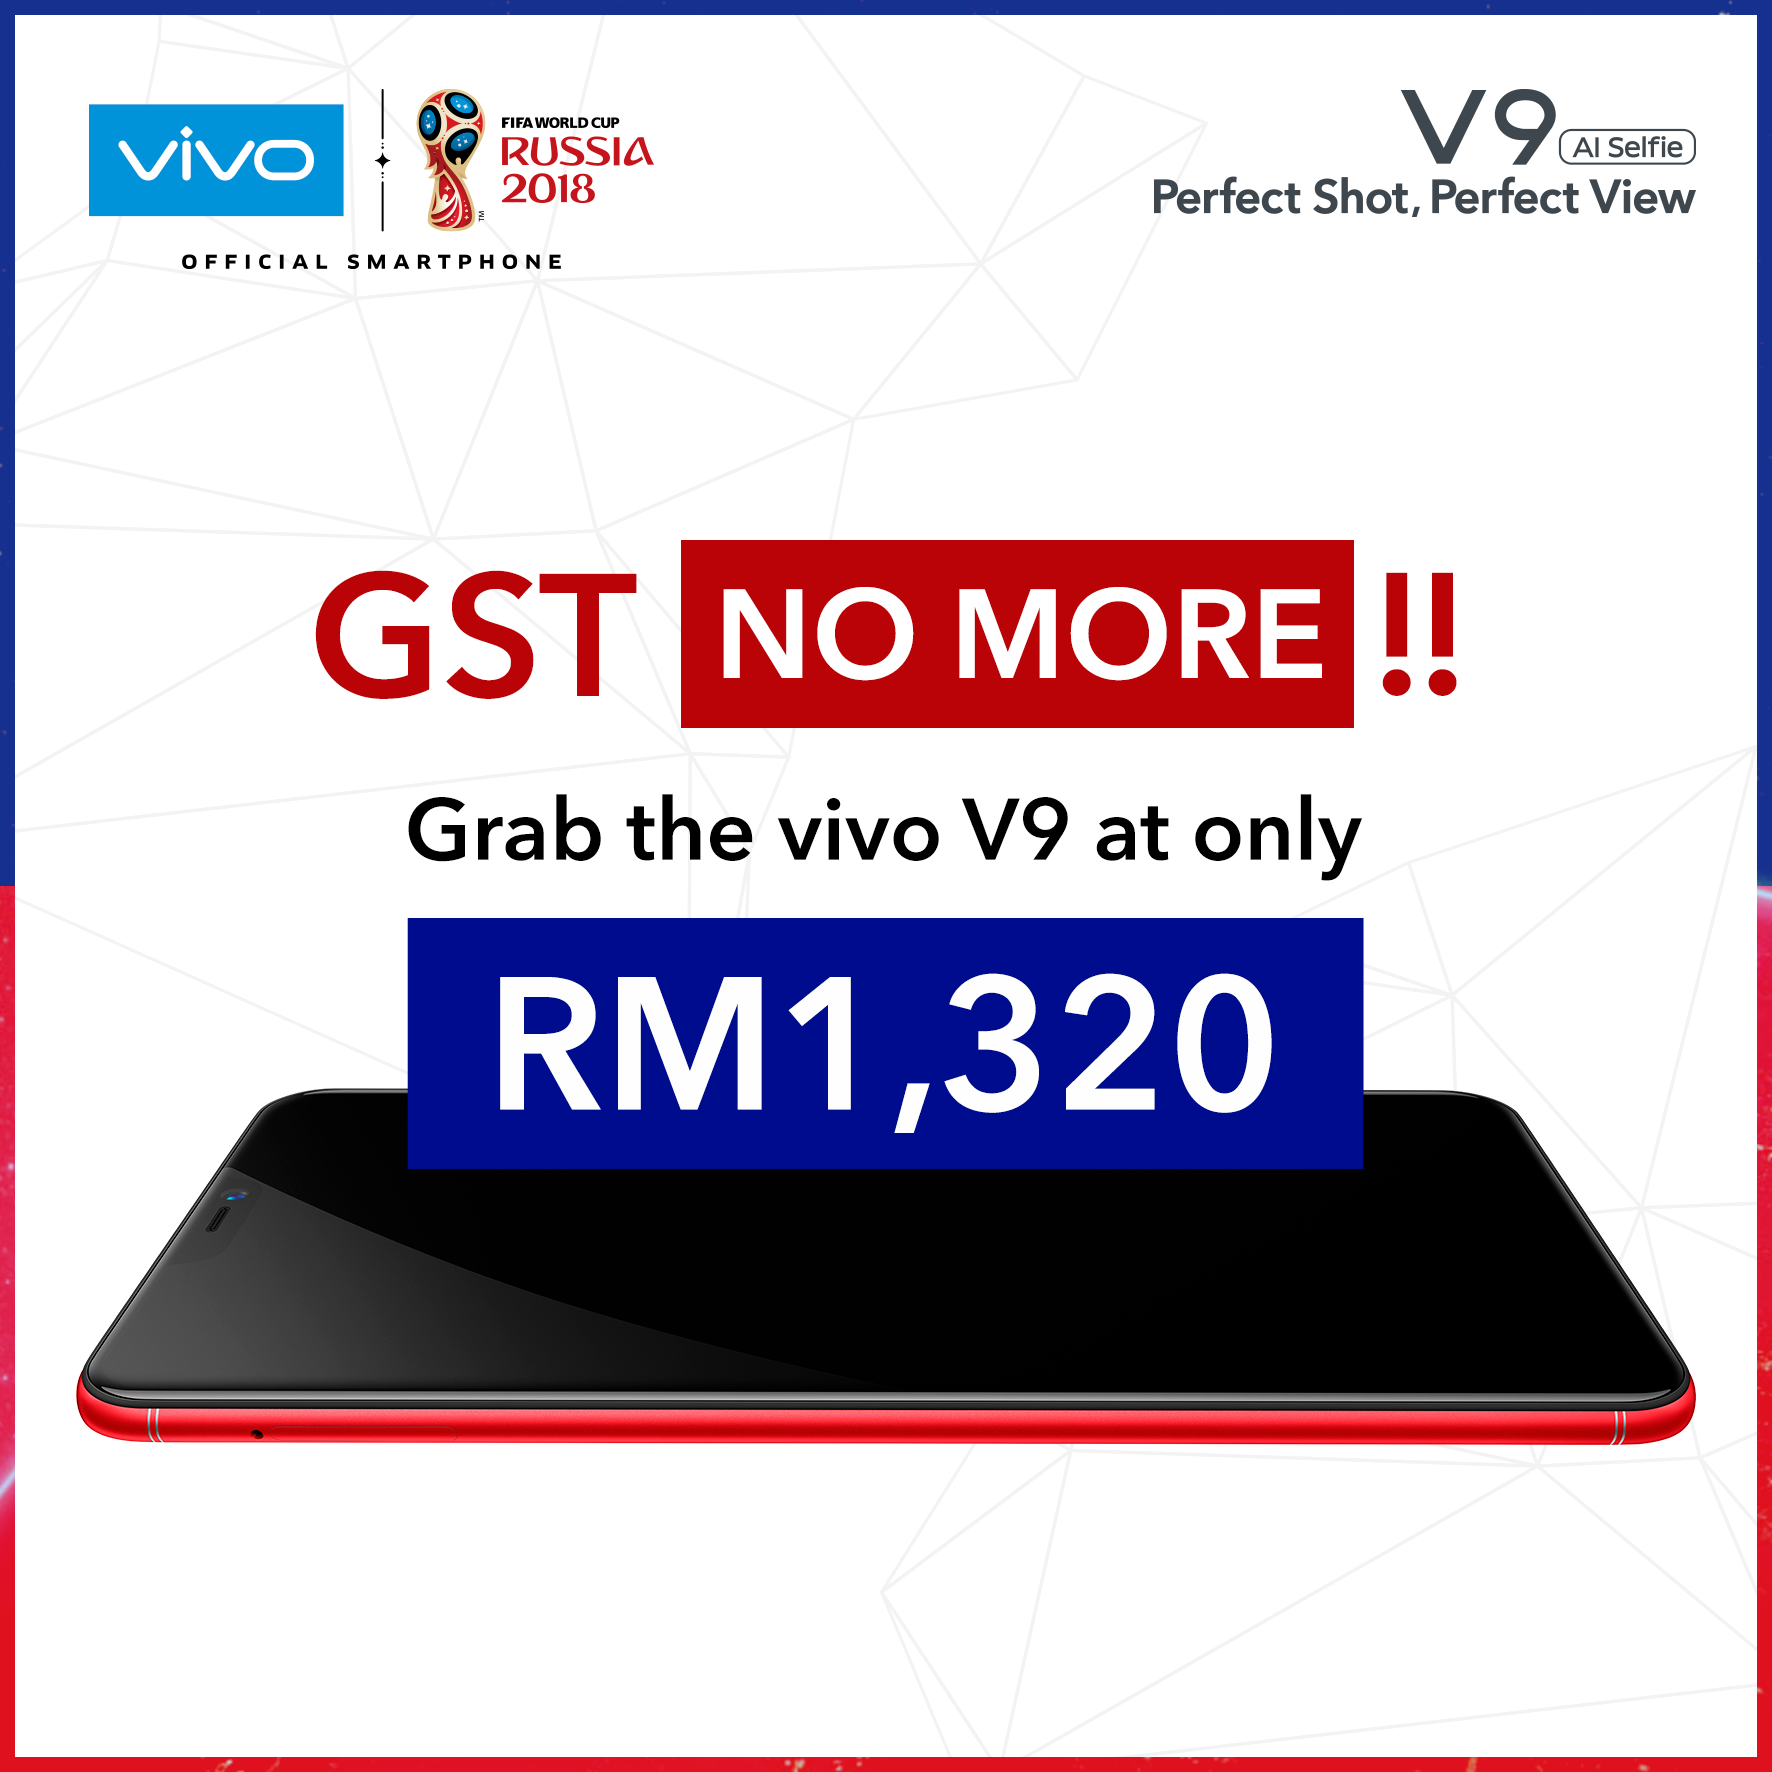 vivo V9 to be on sale for RM1320 starting from 19 May 2018